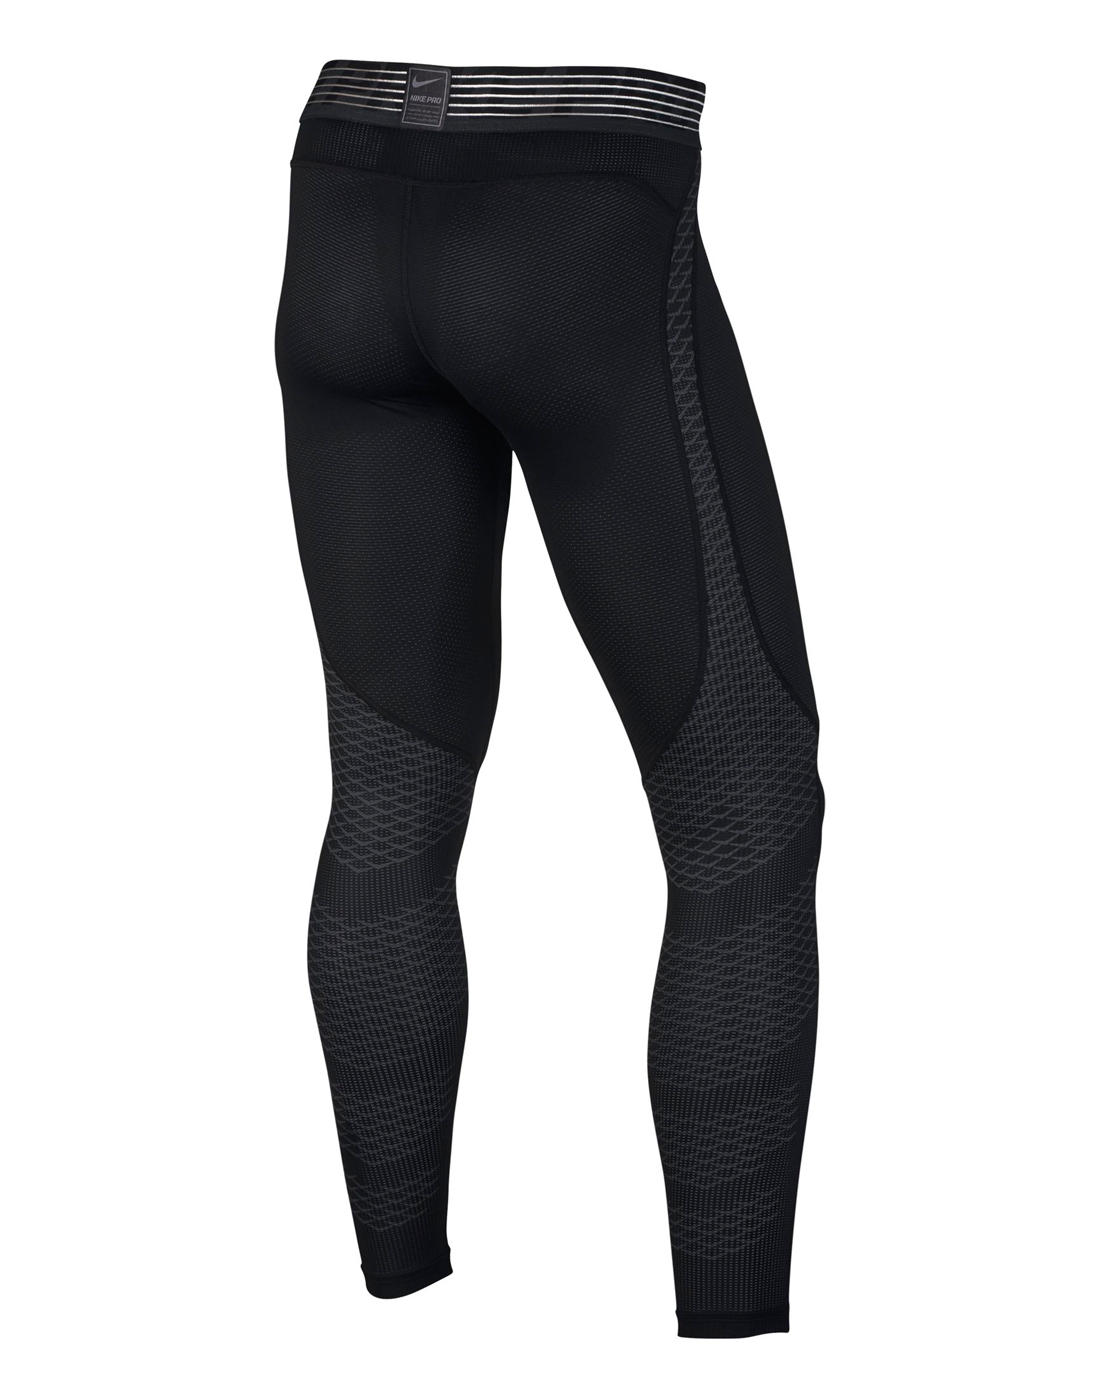 Nike Mens Pro Hypercool Tight - Black | Life Style Sports IE